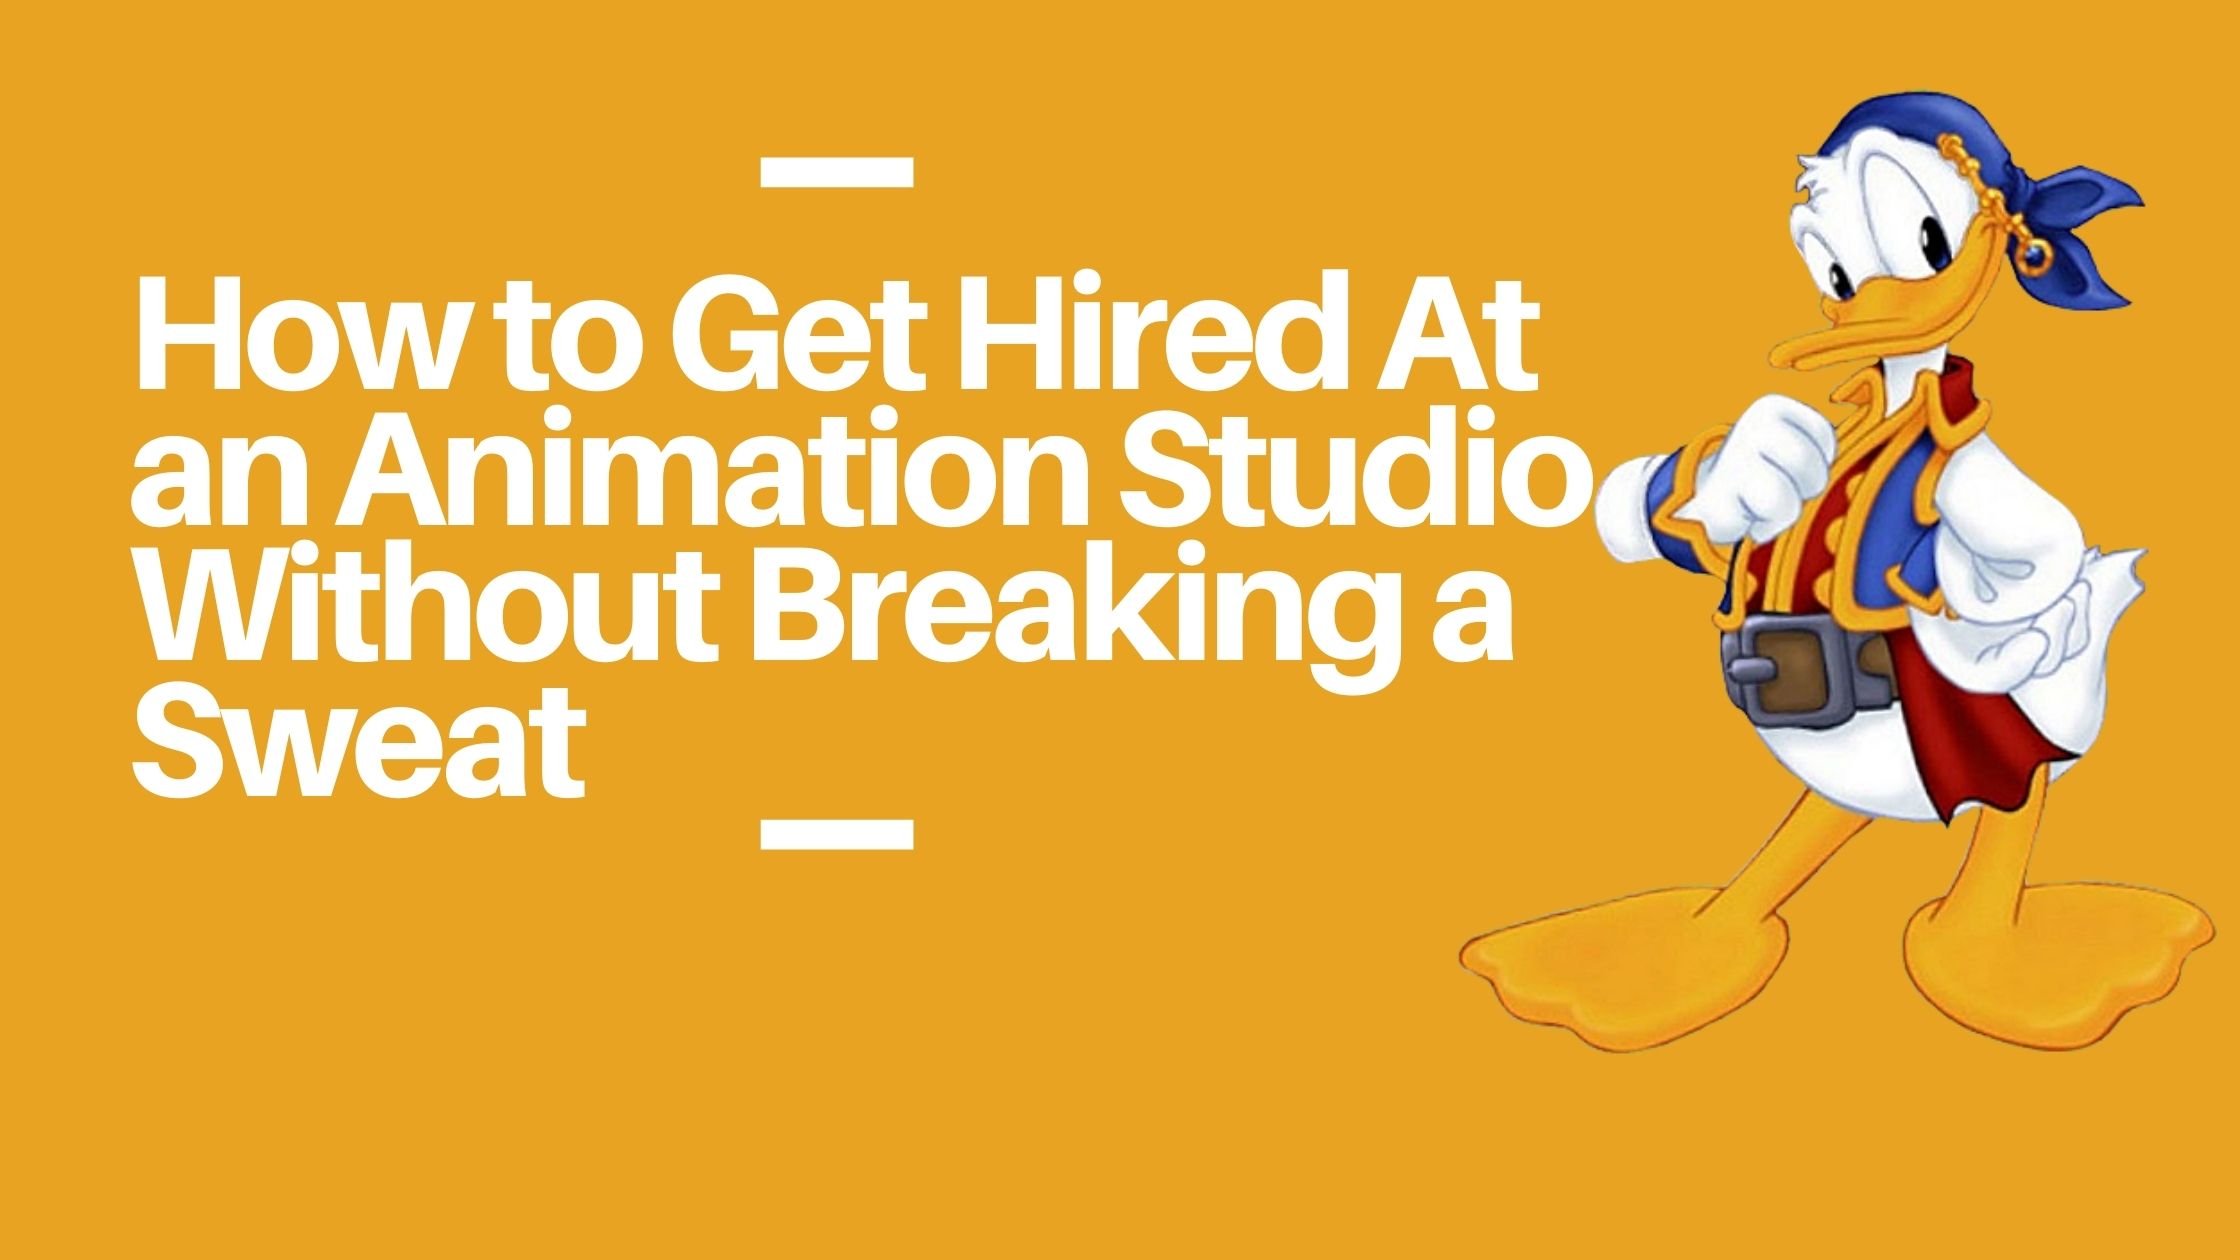 How to Get Hired At an Animation Studio Without Breaking a Sweat